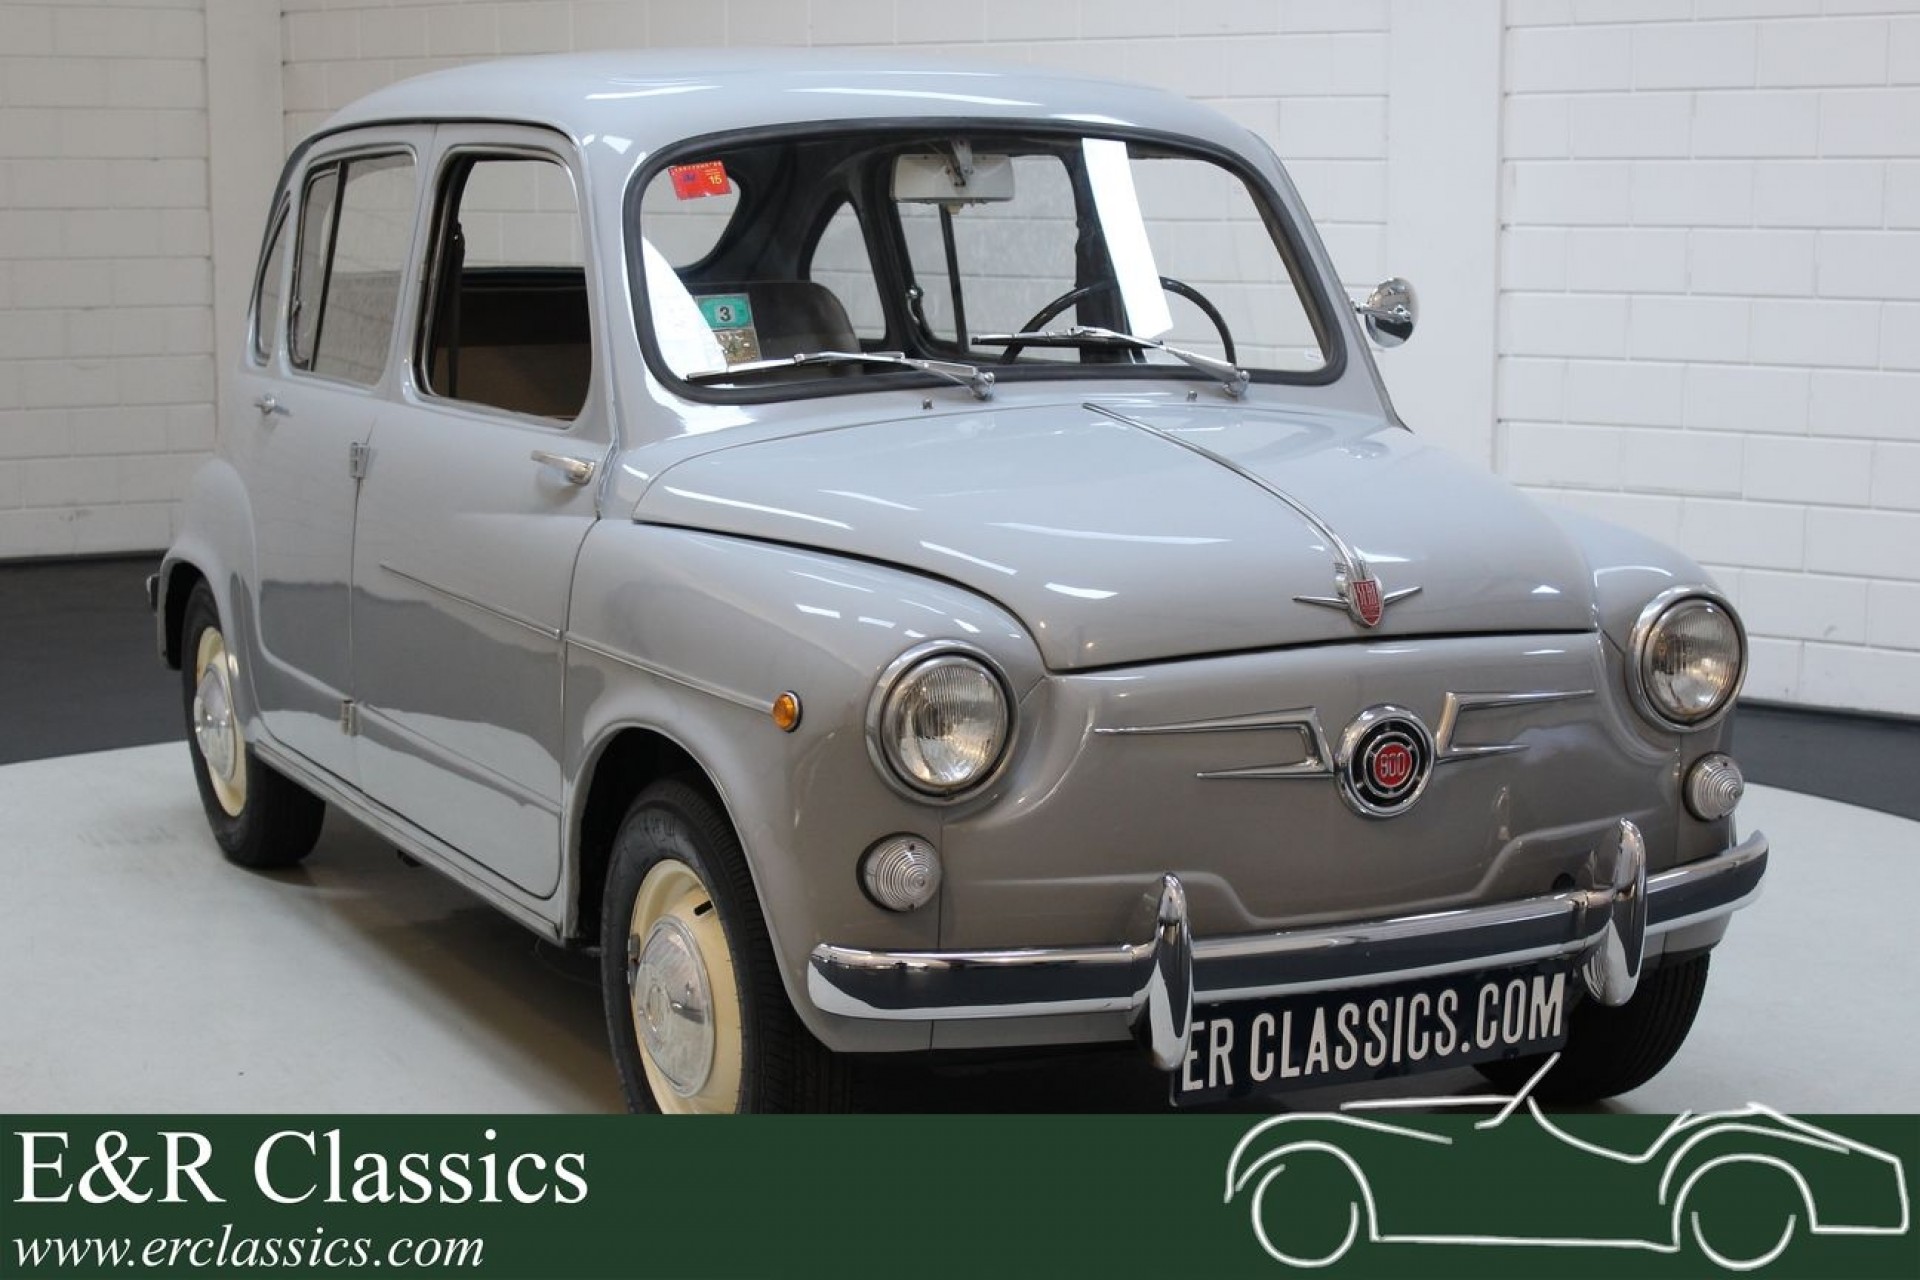 Fiat Seat 800 Extended 600 1967 Very Rare For Sale At Erclassics